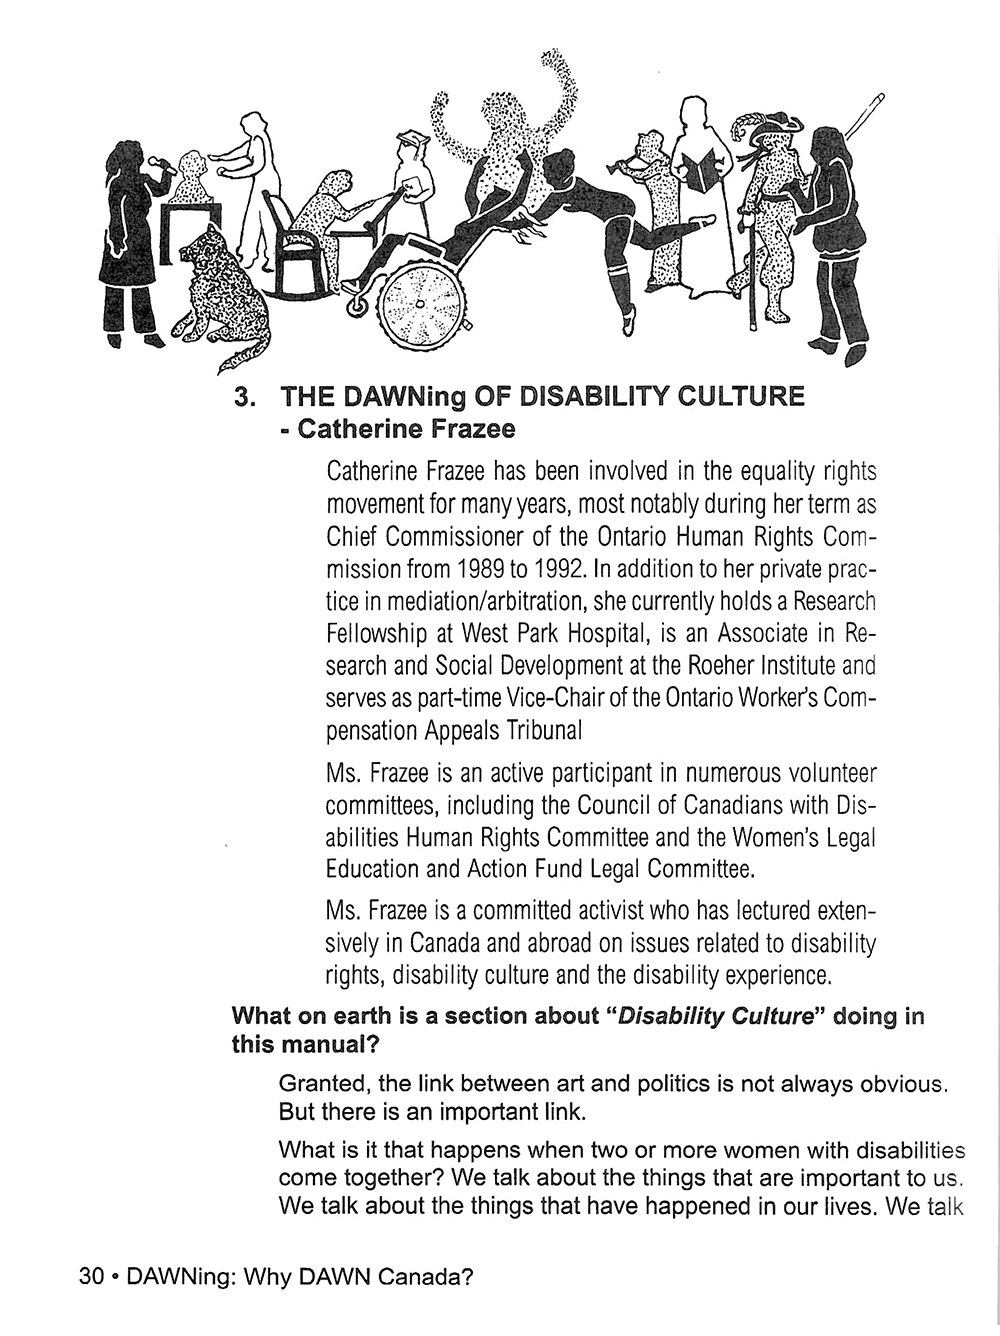 scan de l'article "The DAWNing of Disability Culture" par Catherine Frazee